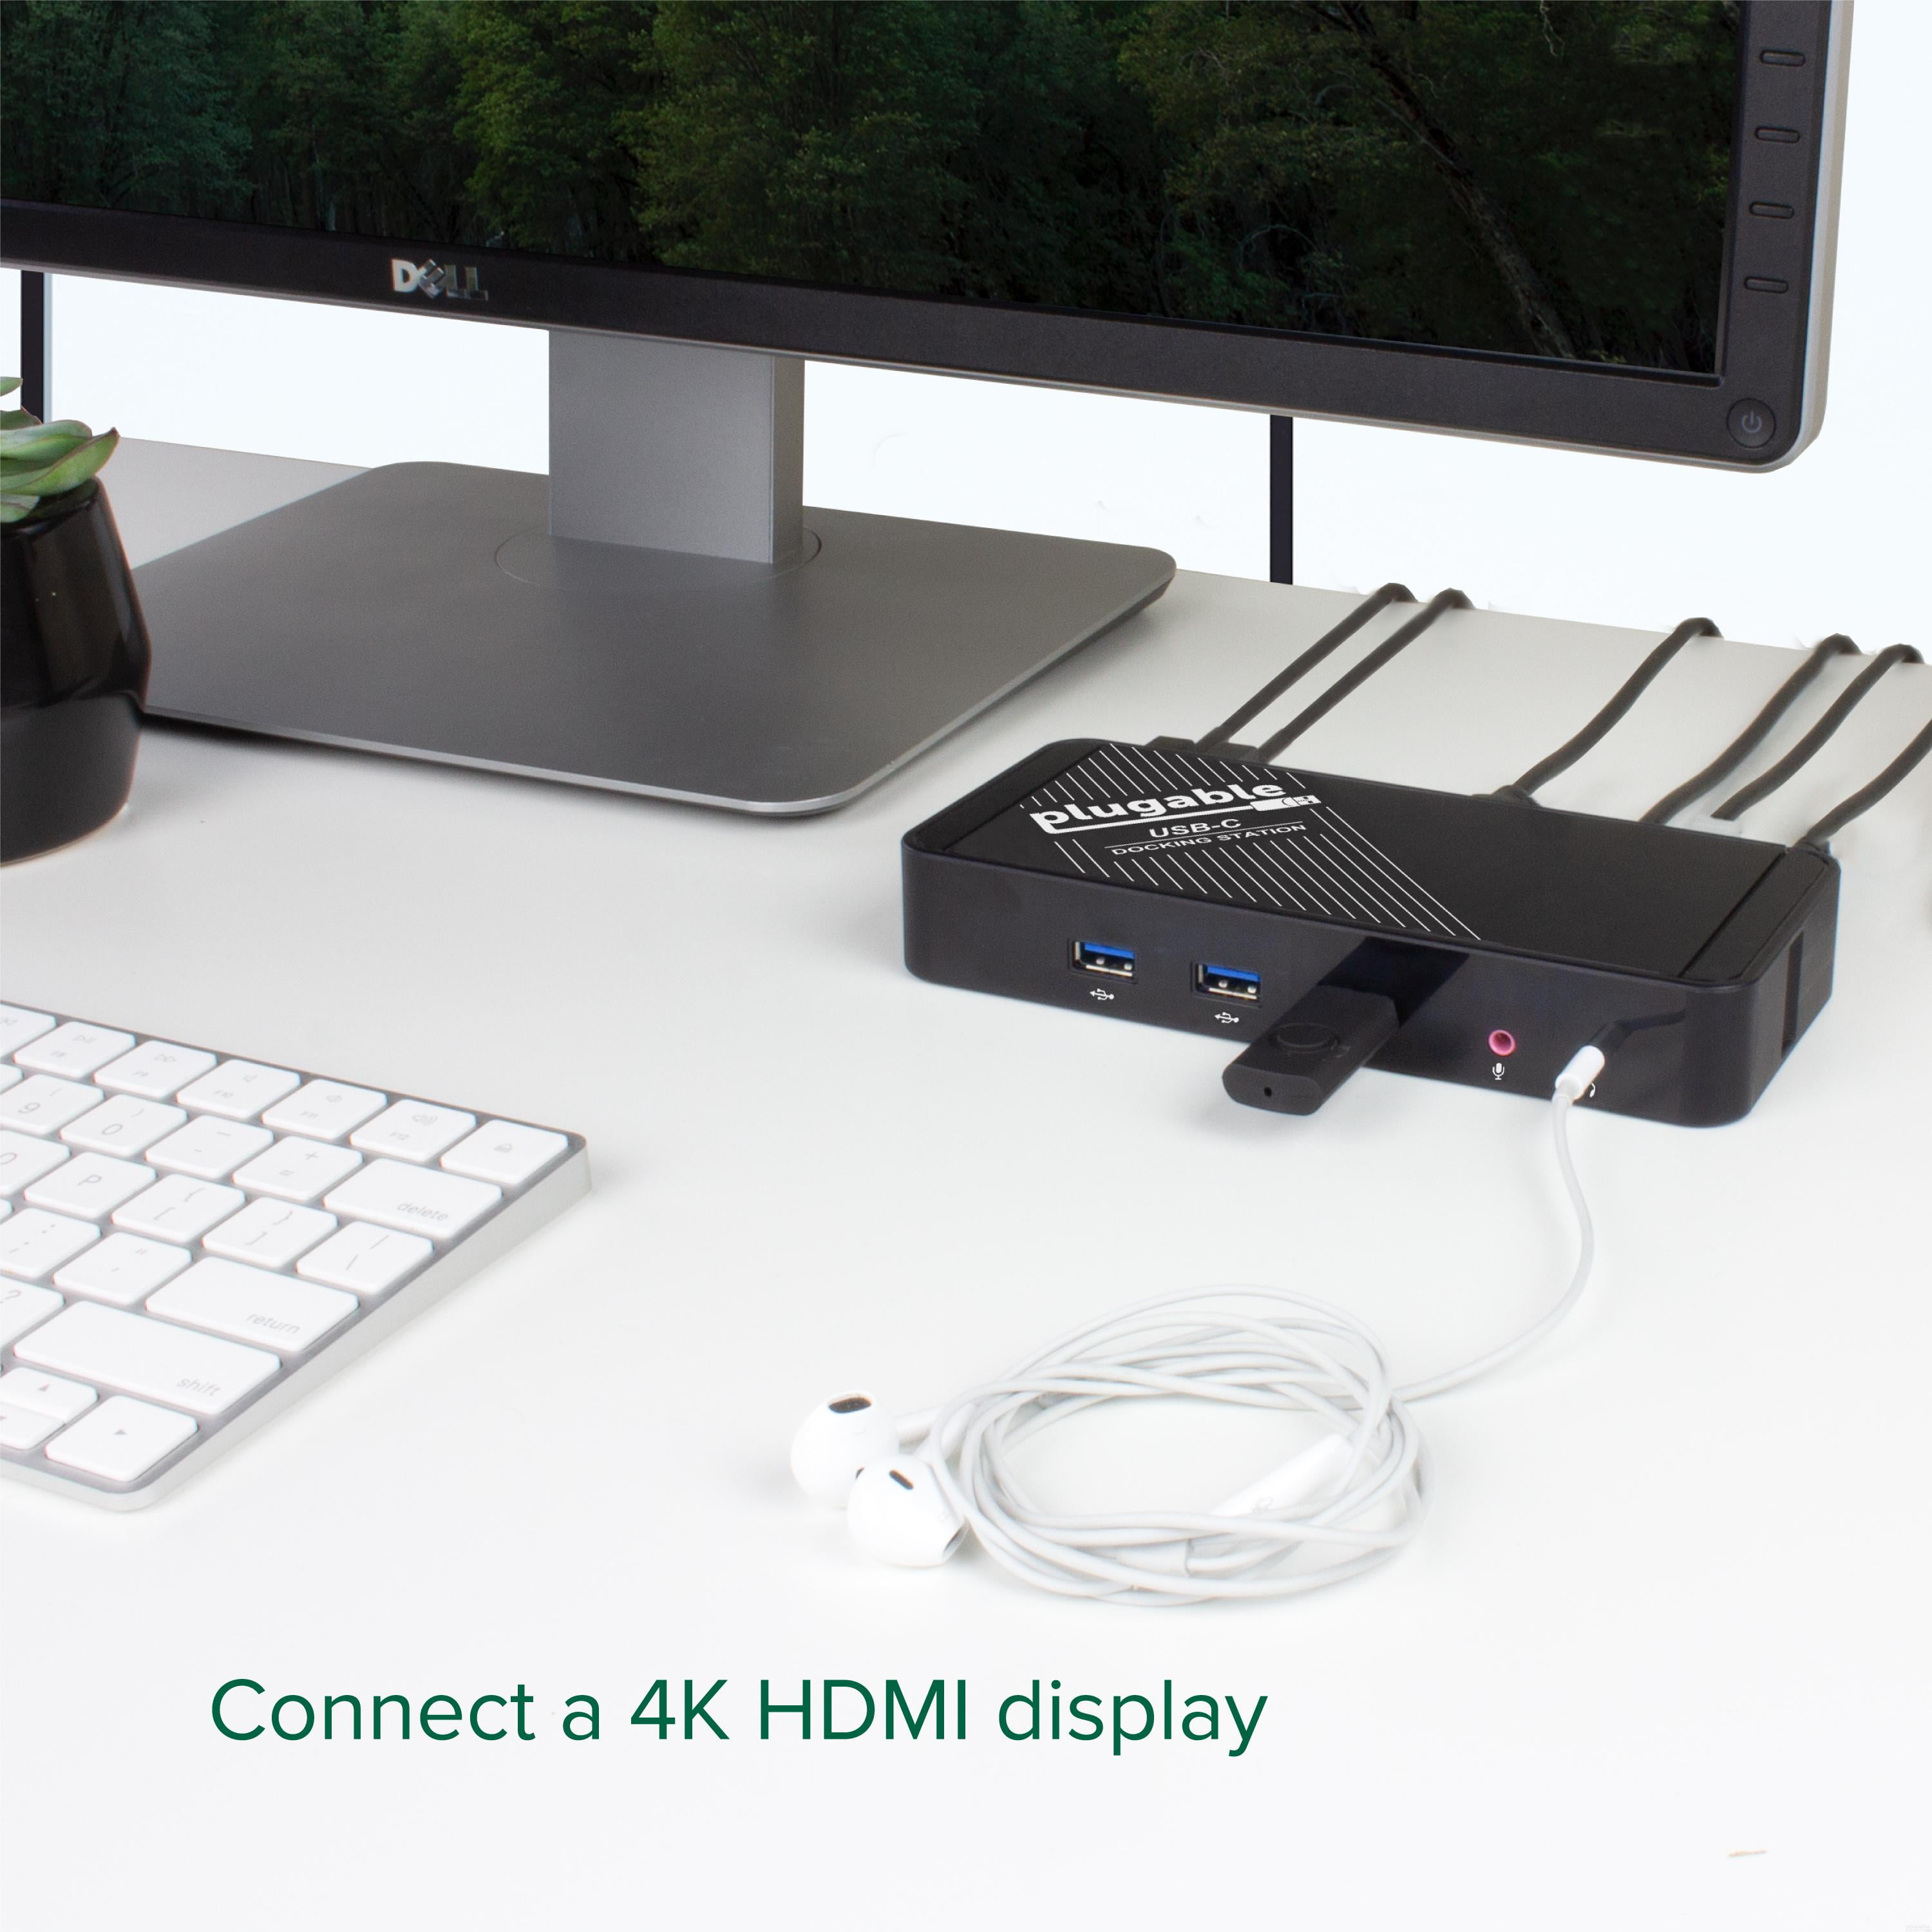 Plugable USB C Dock with Charging Compatible with Thunderbolt 3 and USB-C MacBooks and Specific Windows Supports HDMI Display, 60W PD Charging, Ethernet, 3X USB 3.0 Ports Linux Systems Chromebook